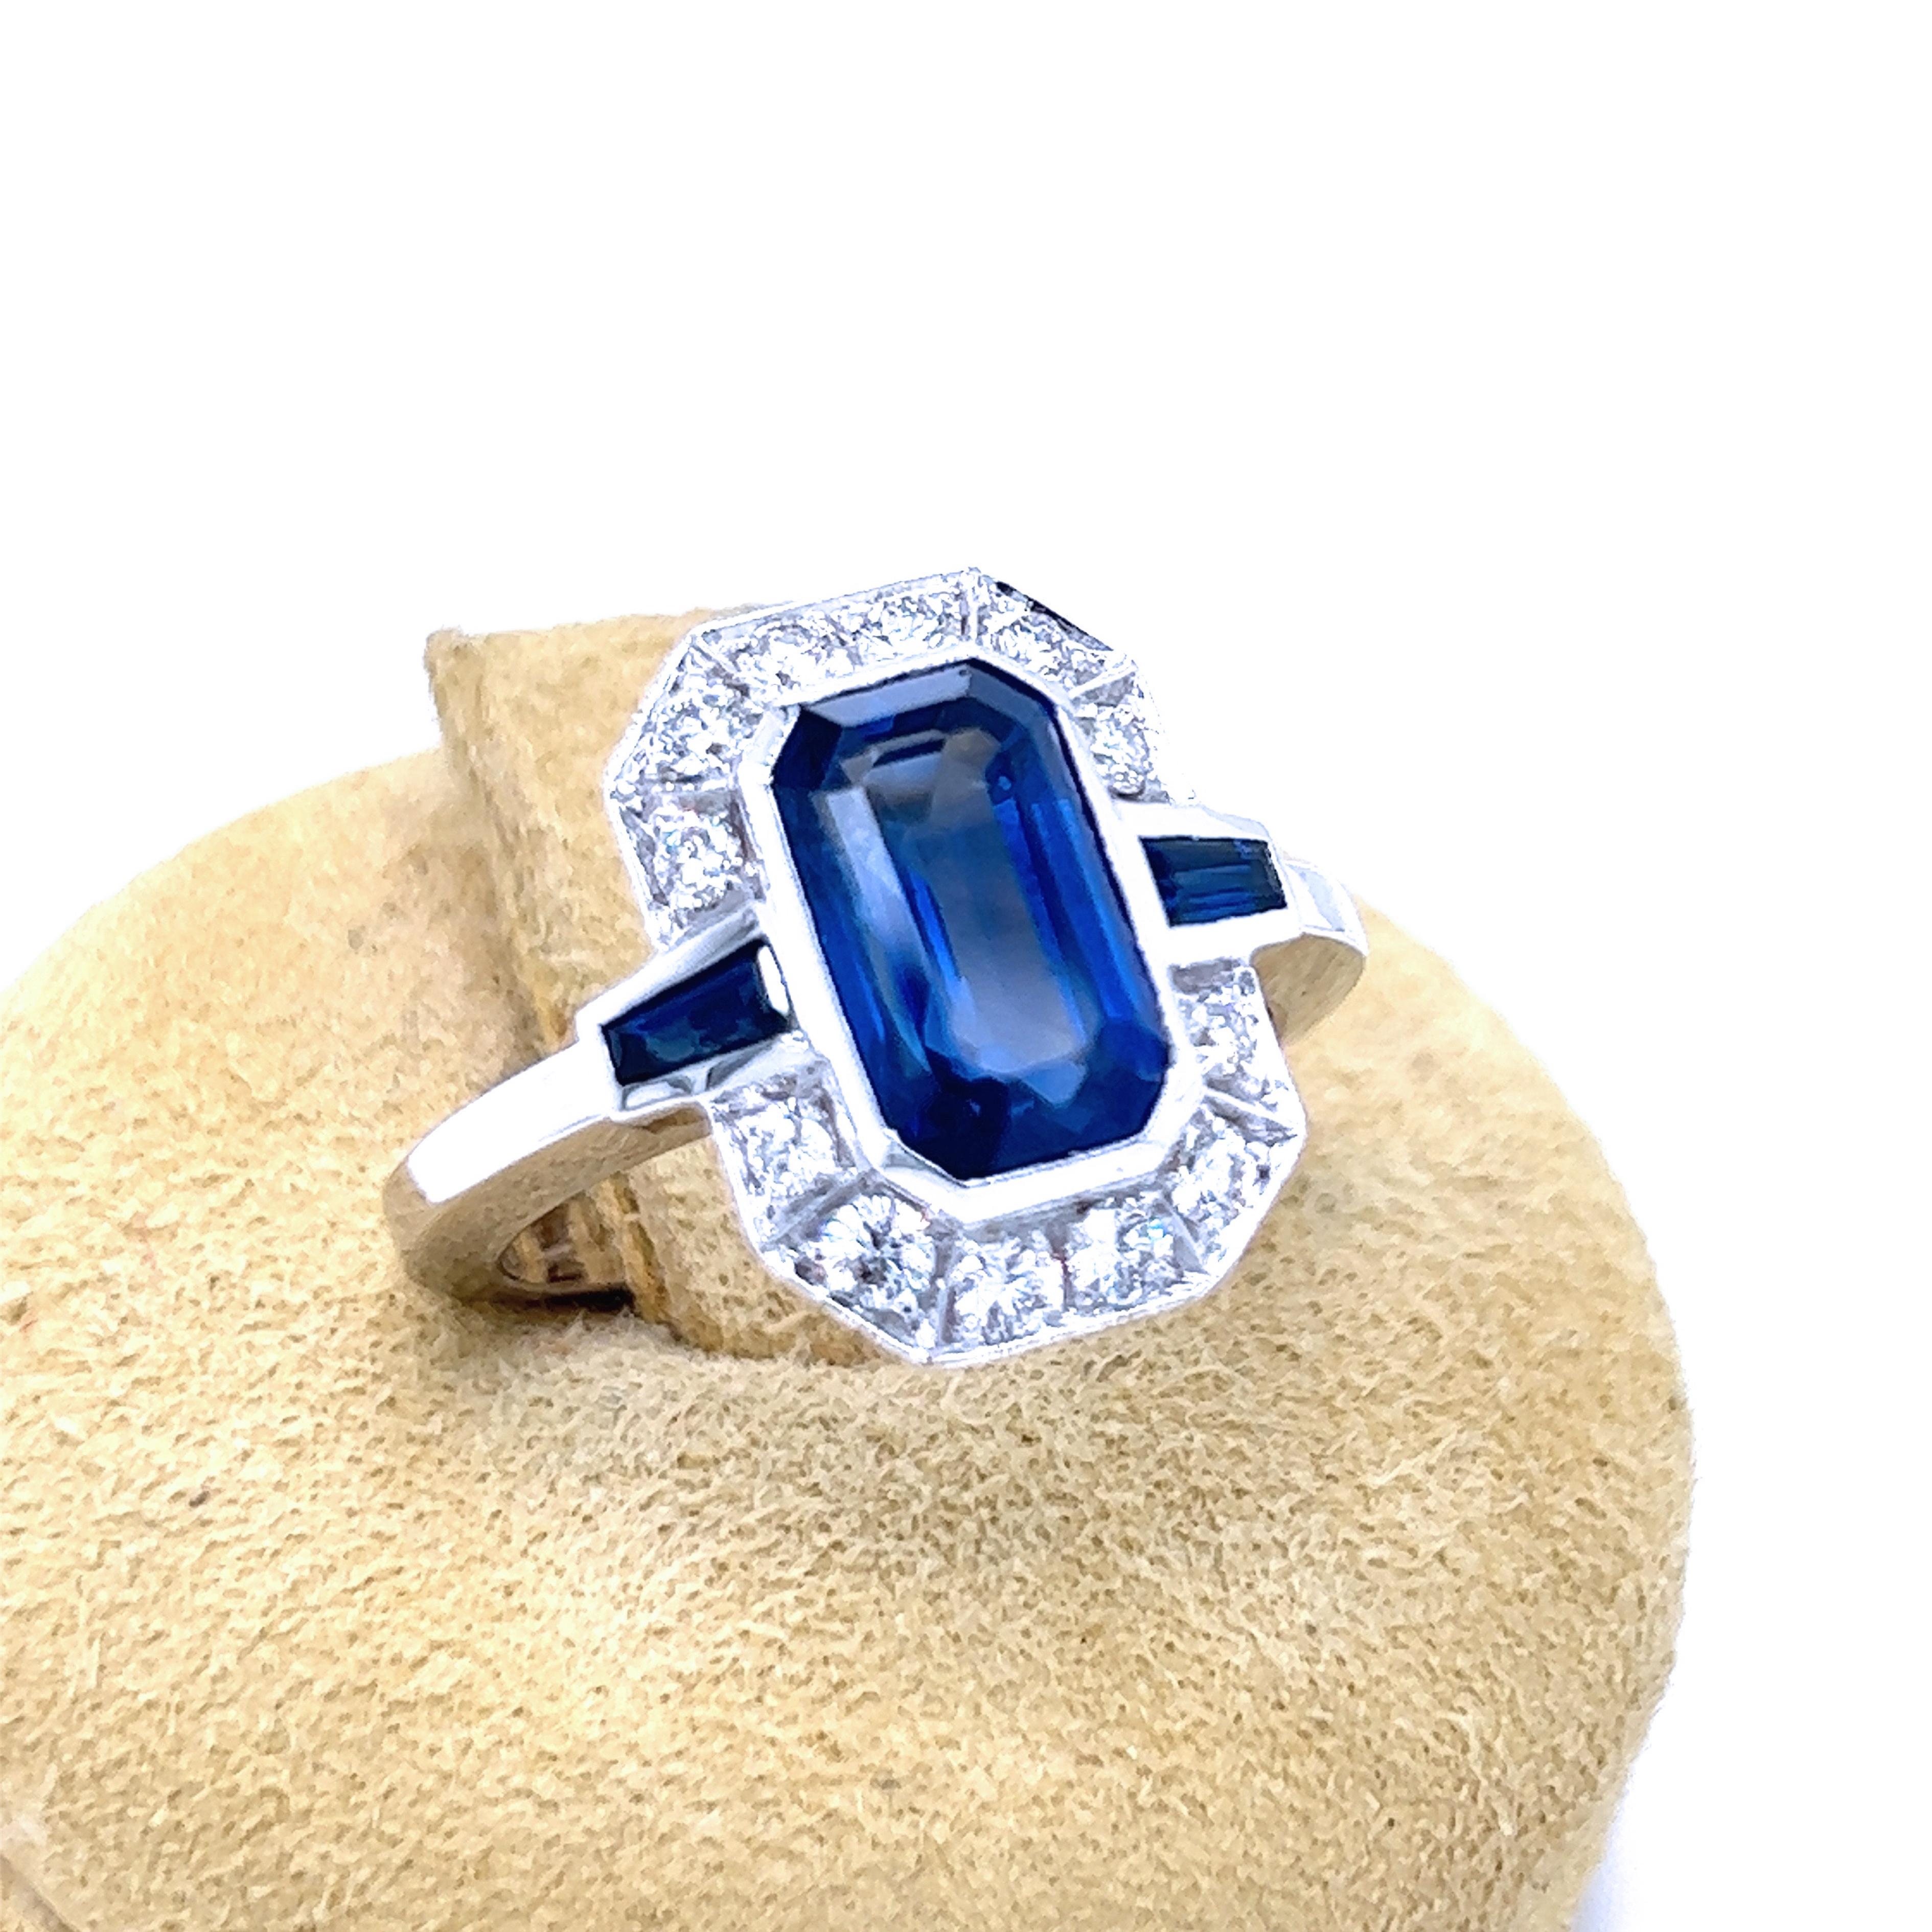 Awesome, IGI Certified, 3.17Kt (10.26x6.10x4.5mm) Royal Blue Sapphire Emerald Cut in a Top Quality 0.43Kt White Diamond Brilliant Cut, 0.26Kt Sapphire Tapered Baguette Timeless White Gold Setting Ring.
As stated in IGI Certicate 522236955 May 3